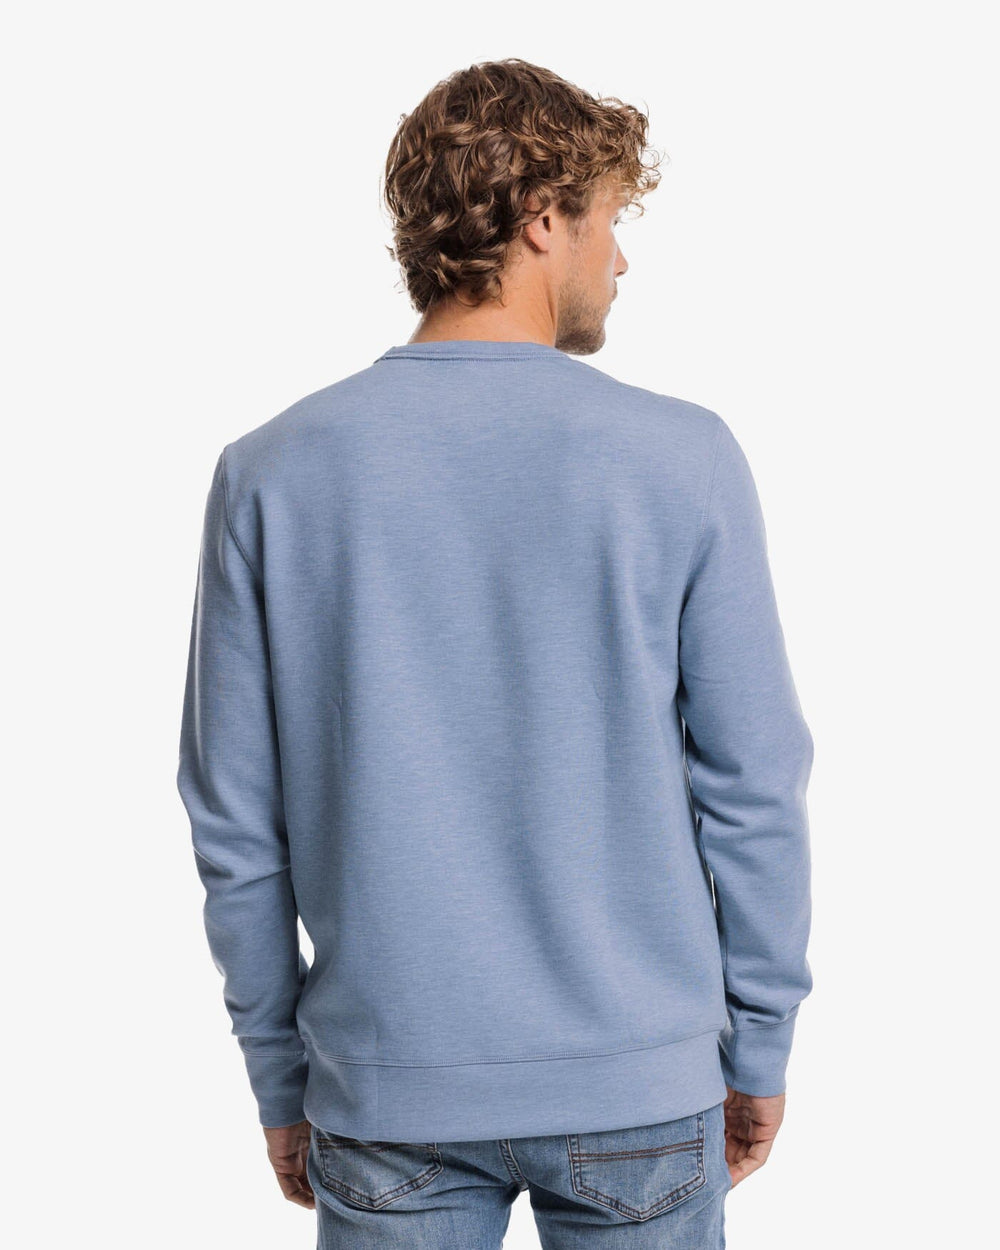 The back view of the Southern Tide Lockley Heather Interlock Crew by Southern Tide - Heather Blue Haze